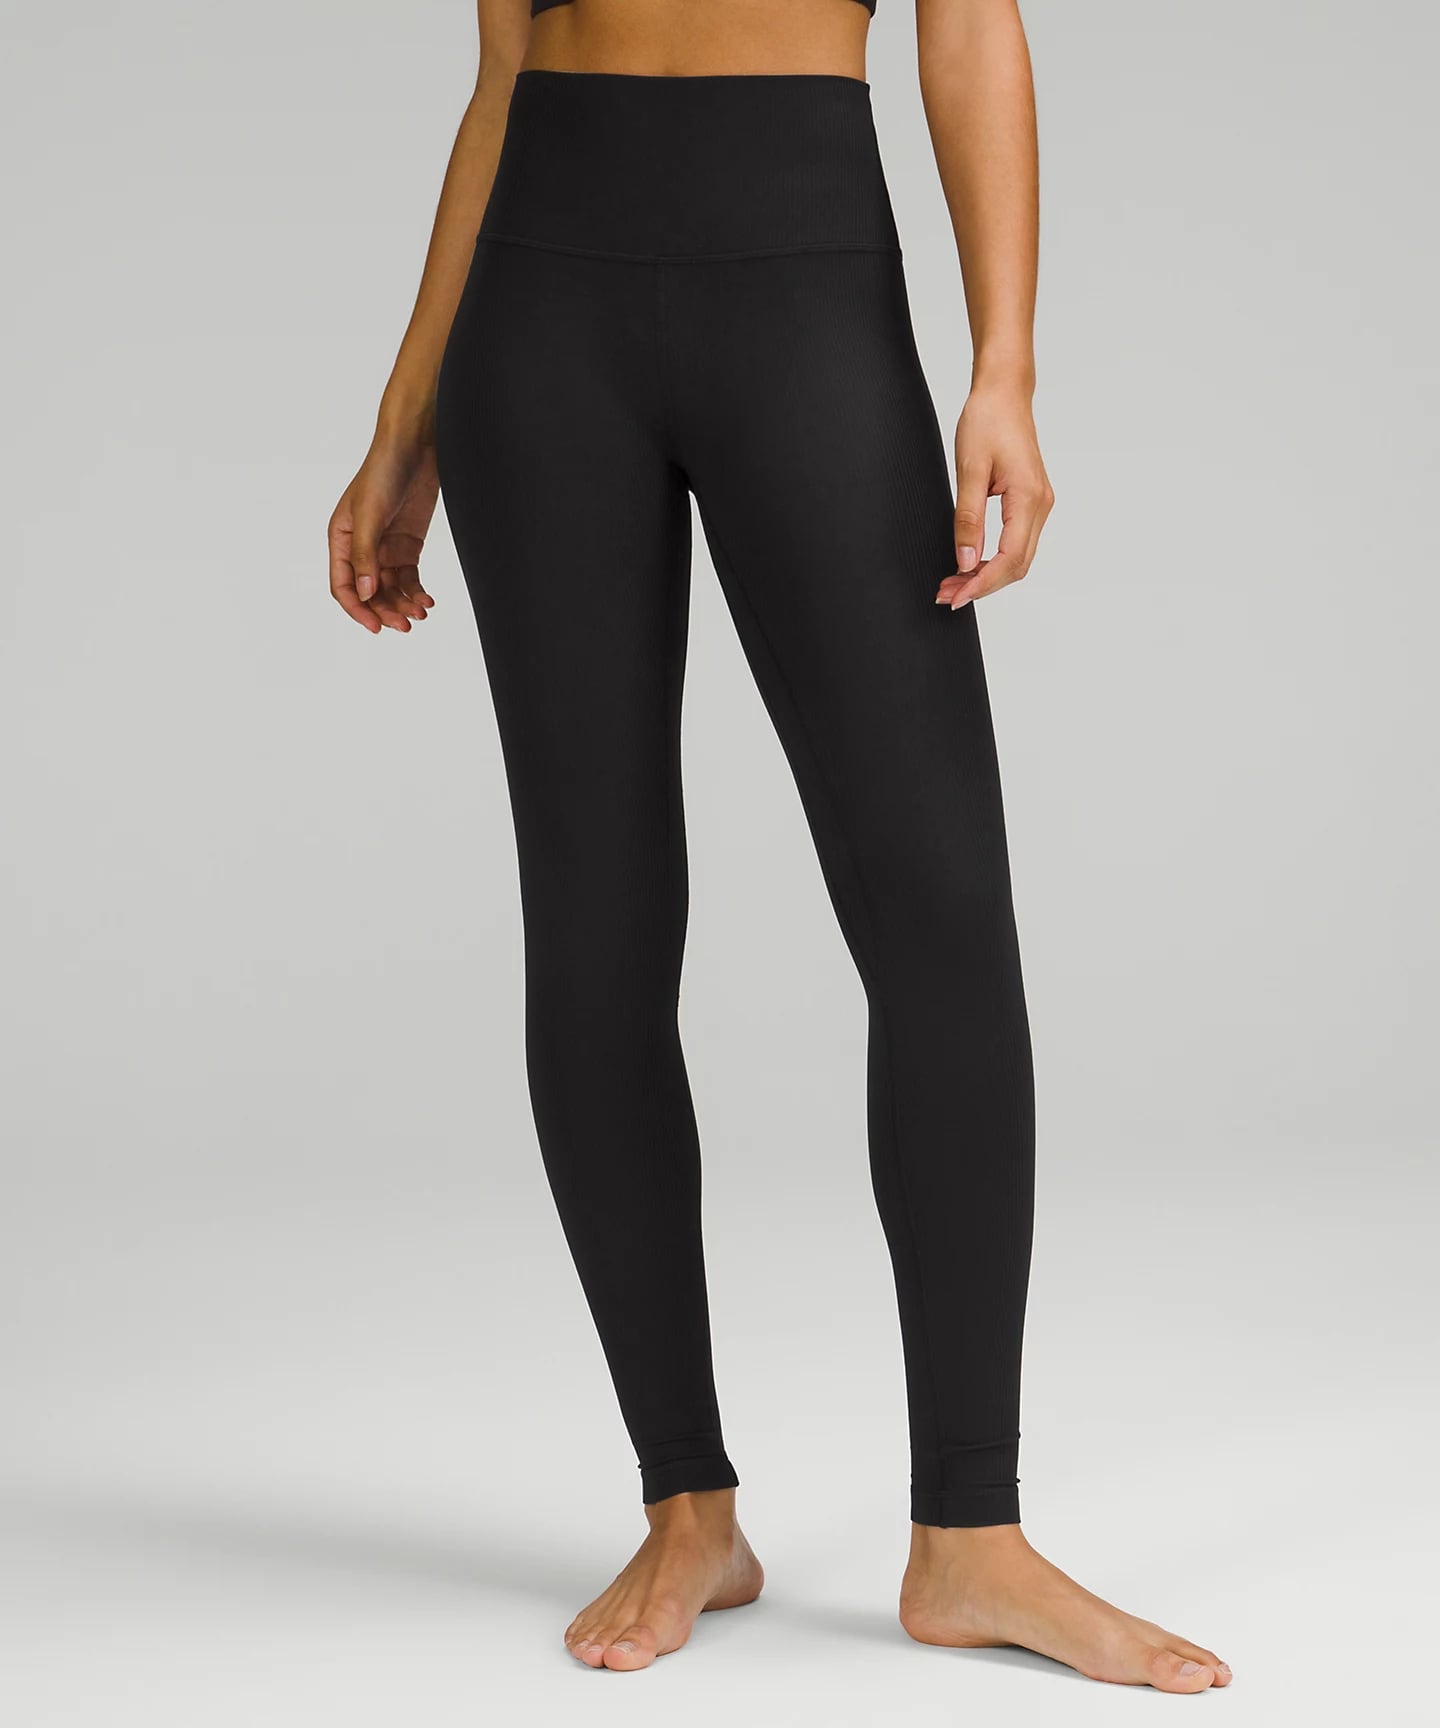 Lulu Lemon Pants - could be a good alternative to legging and/or skinnies